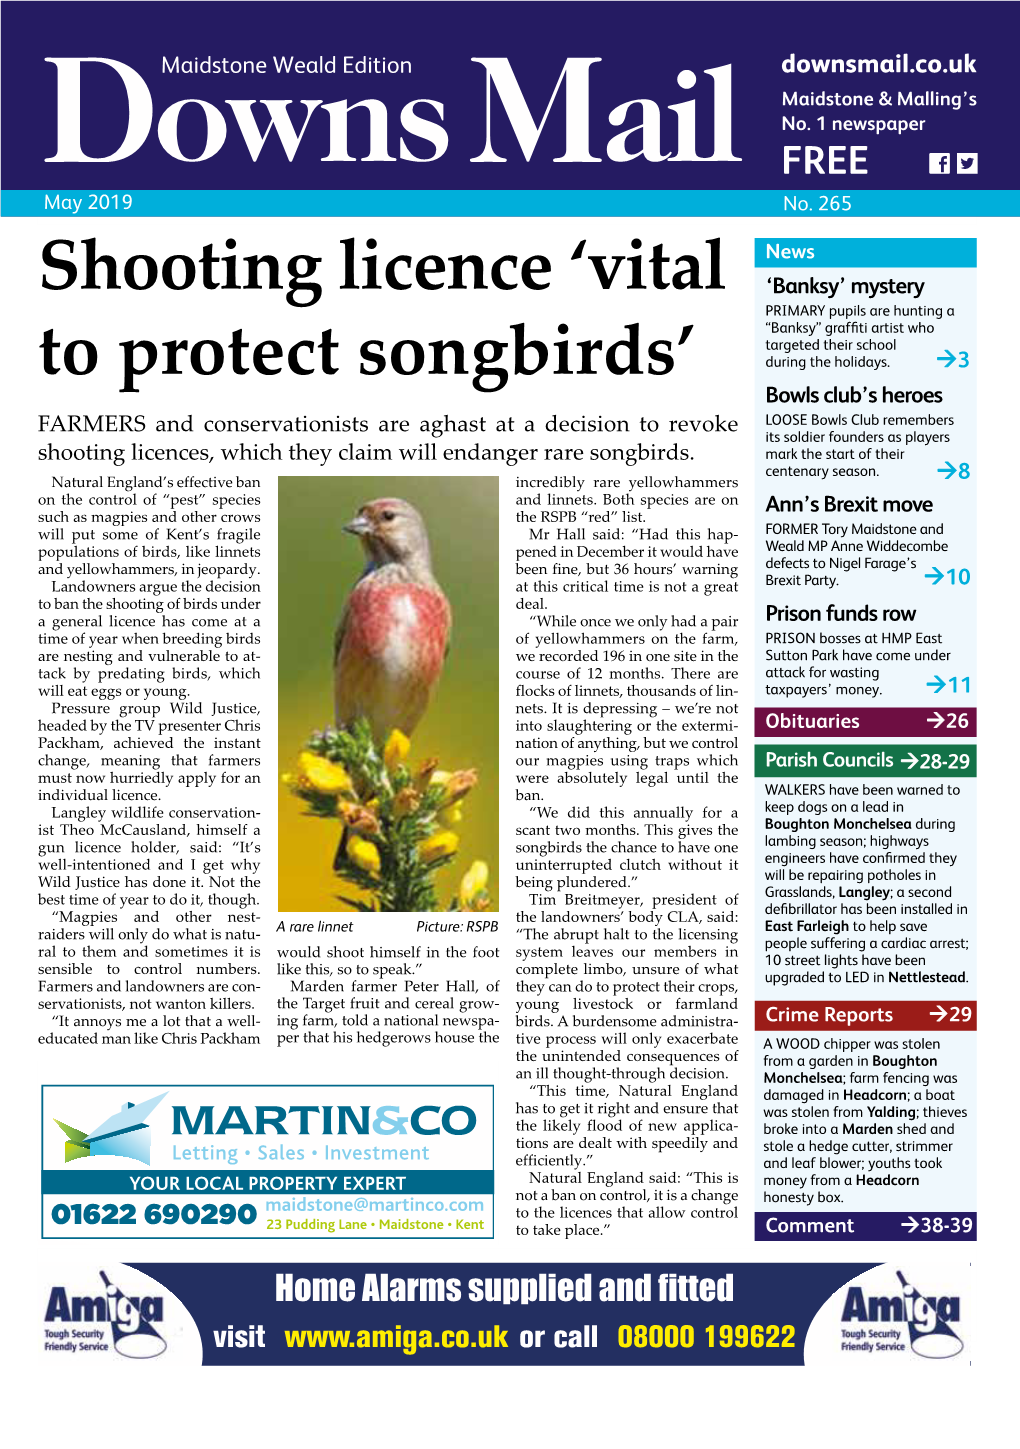 Shooting Licence 'Vital to Protect Songbirds'